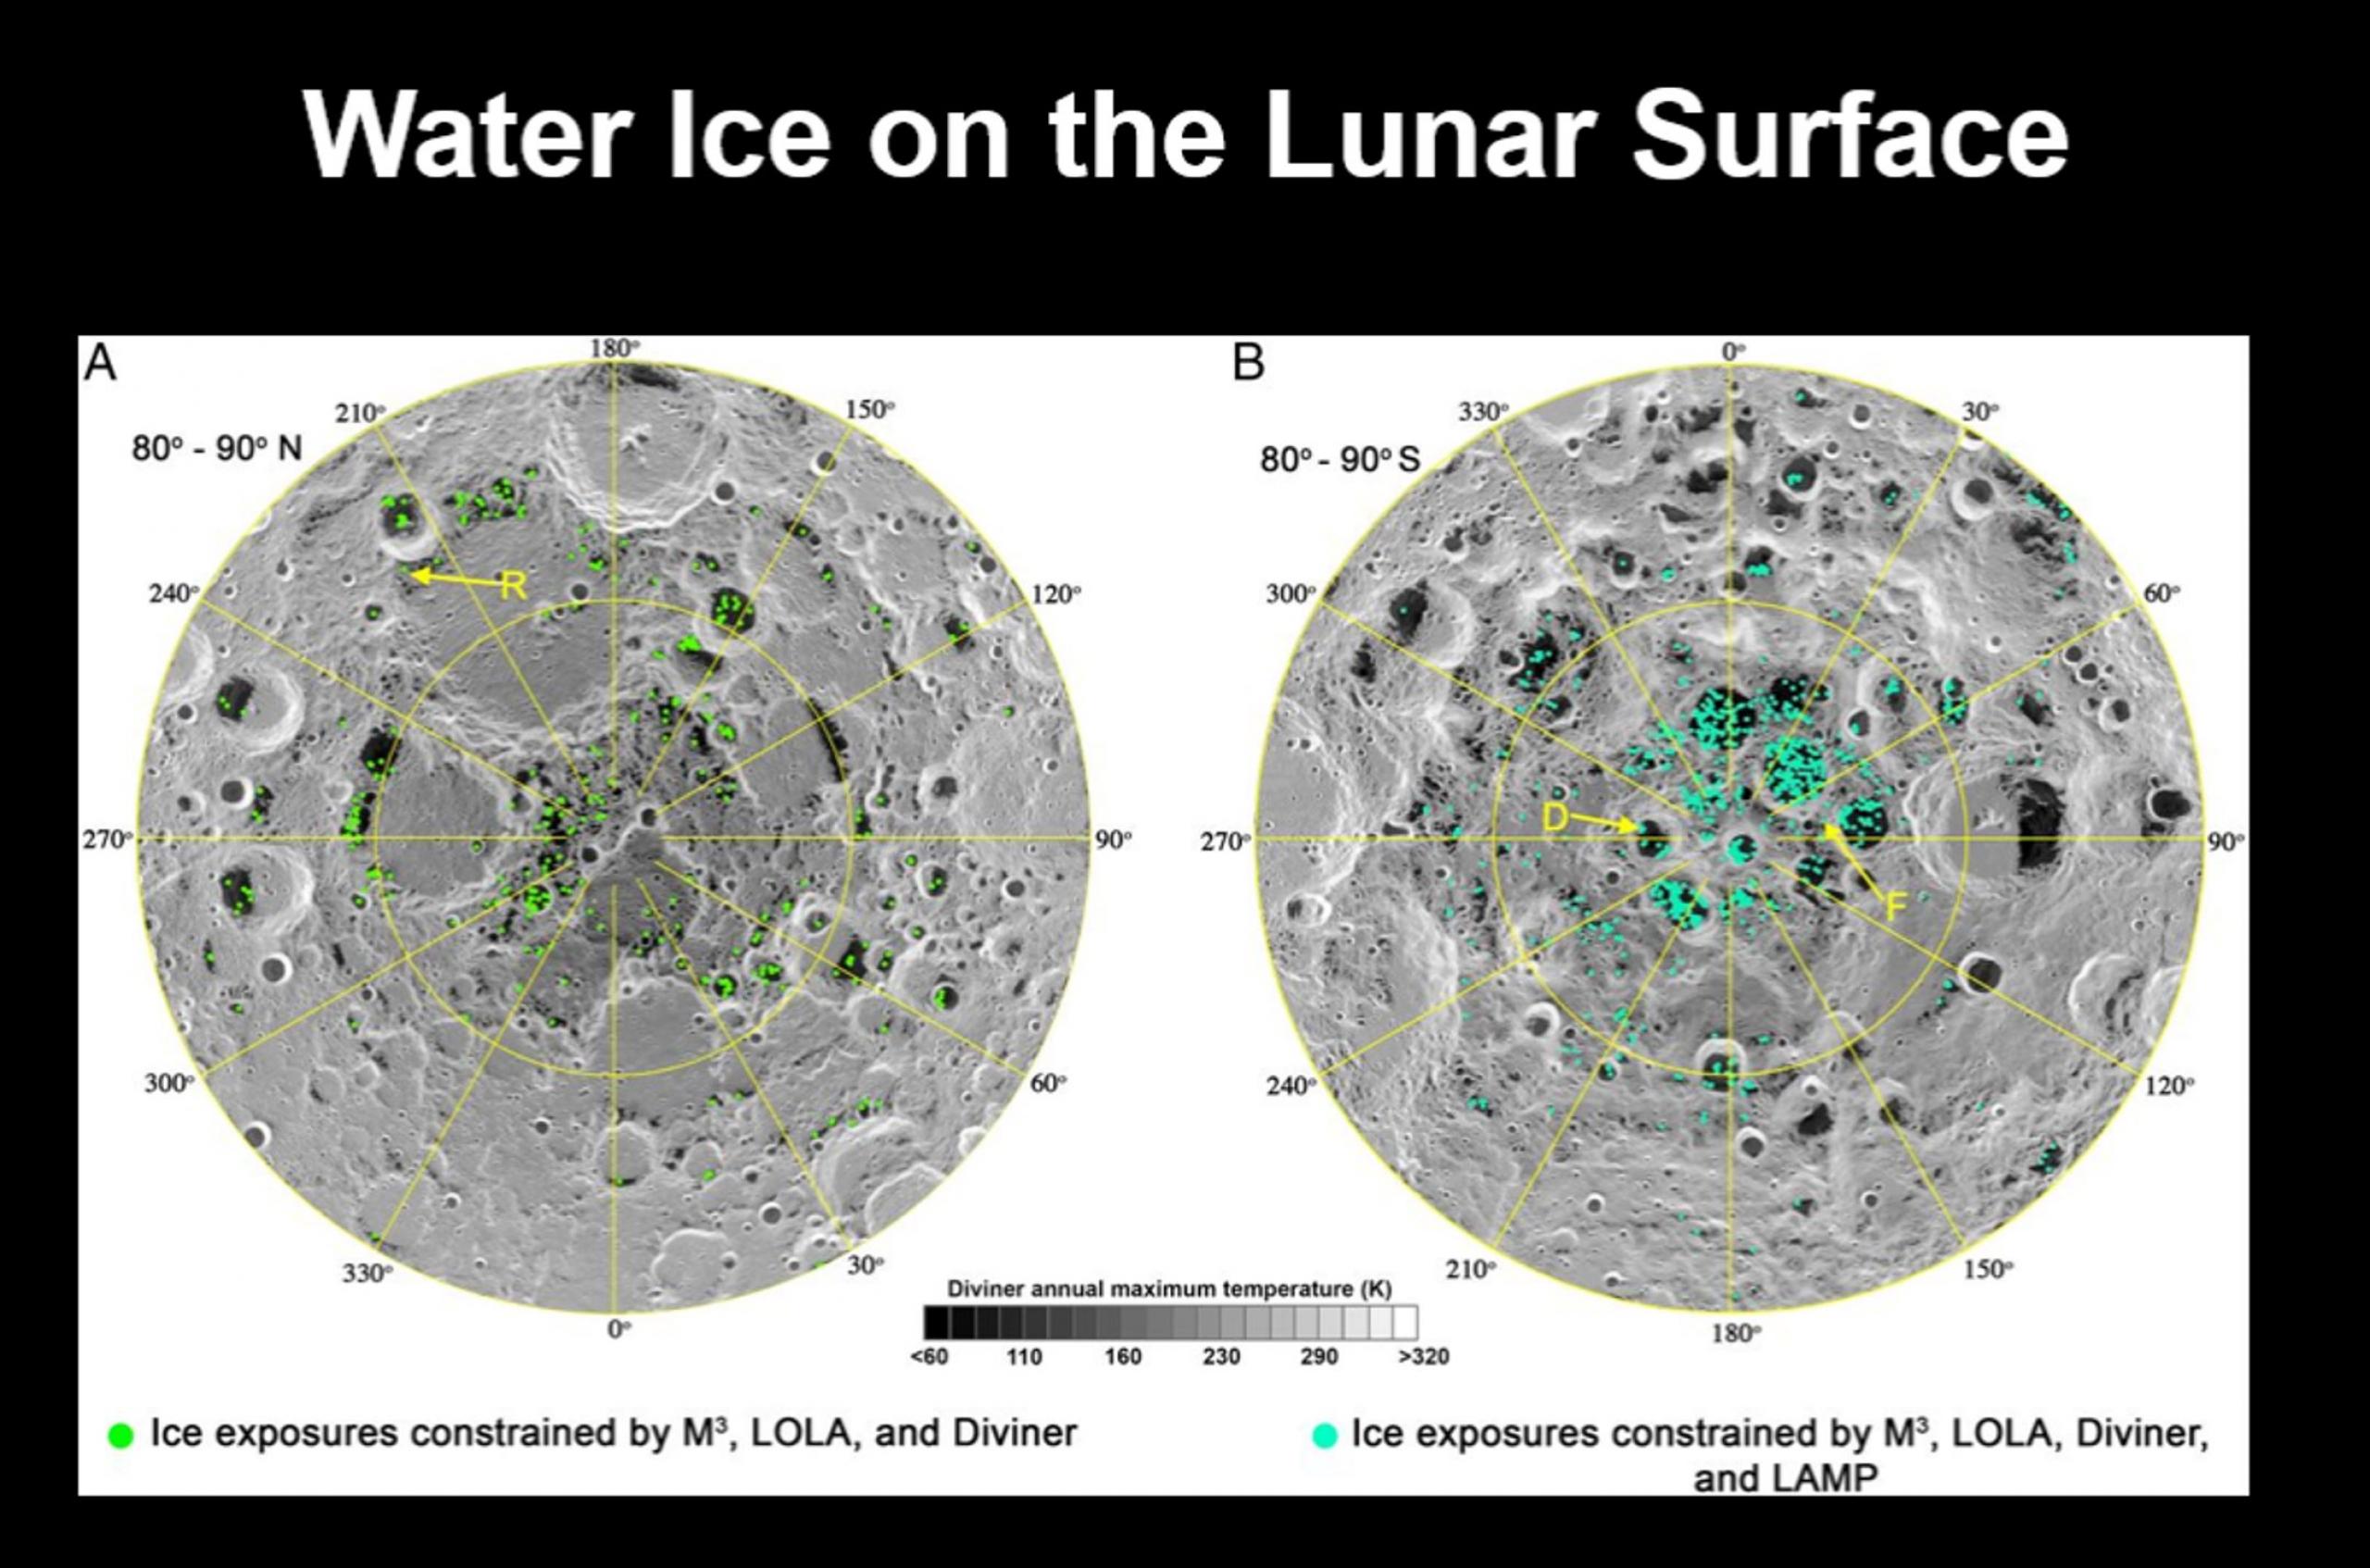 Direct evidence of surface exposed water ice in the lunar polar regions.